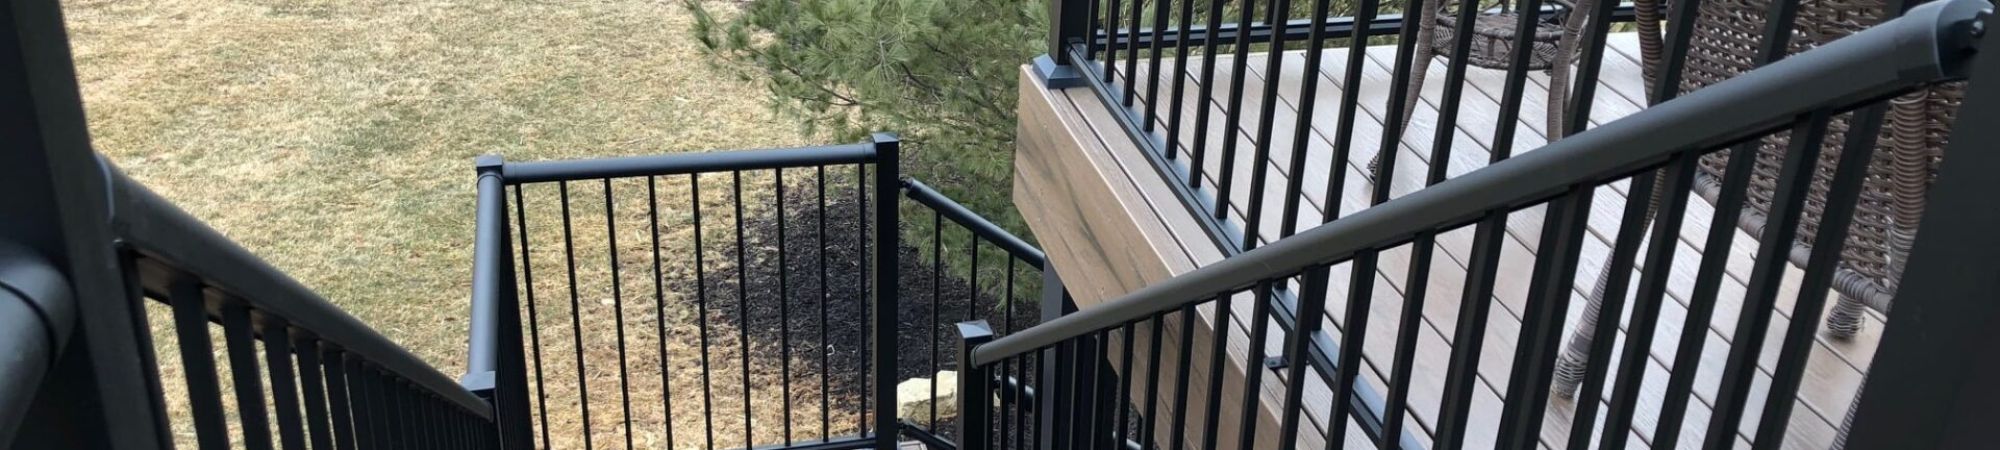 Staircase with black aluminum picket railings